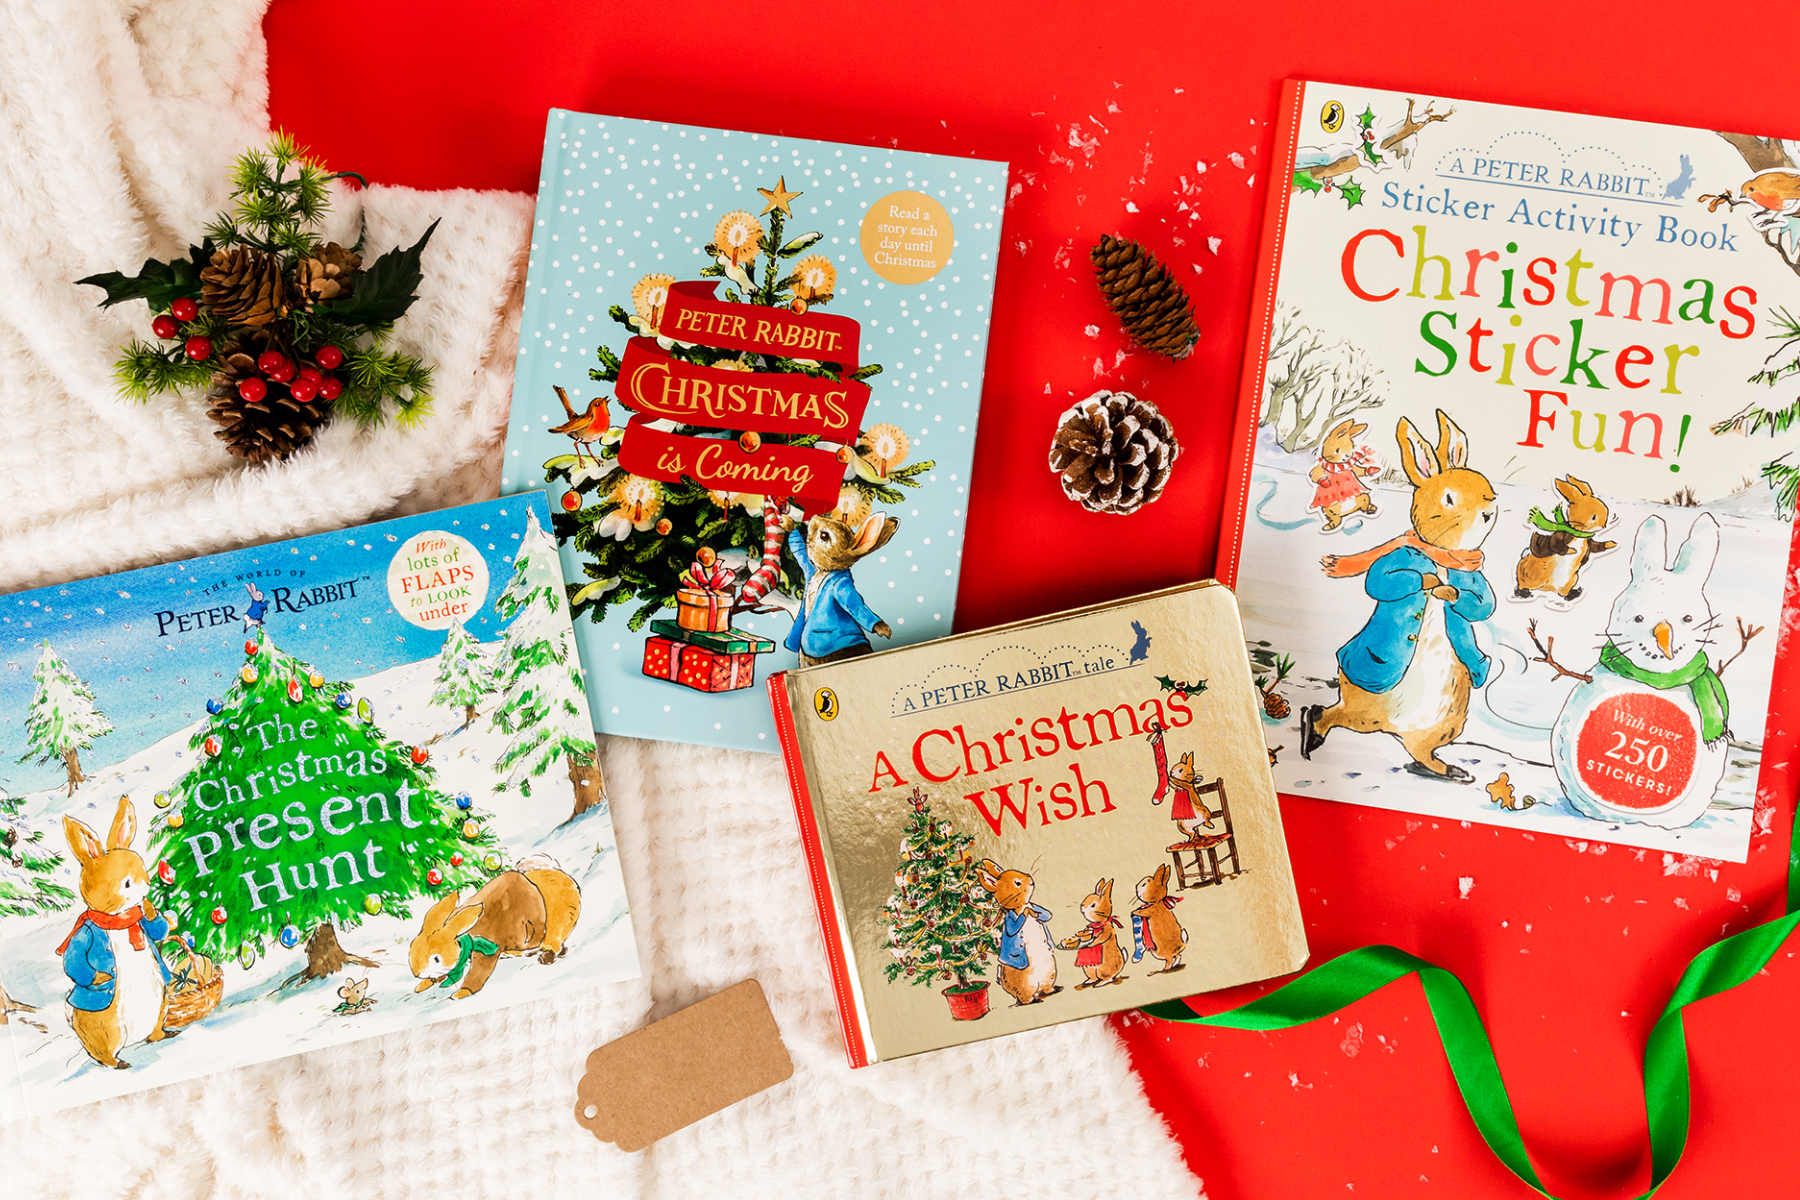 A photo of a bundle of Peter Rabbit books on a red background alongside a blanket, pine cones and green ribbon